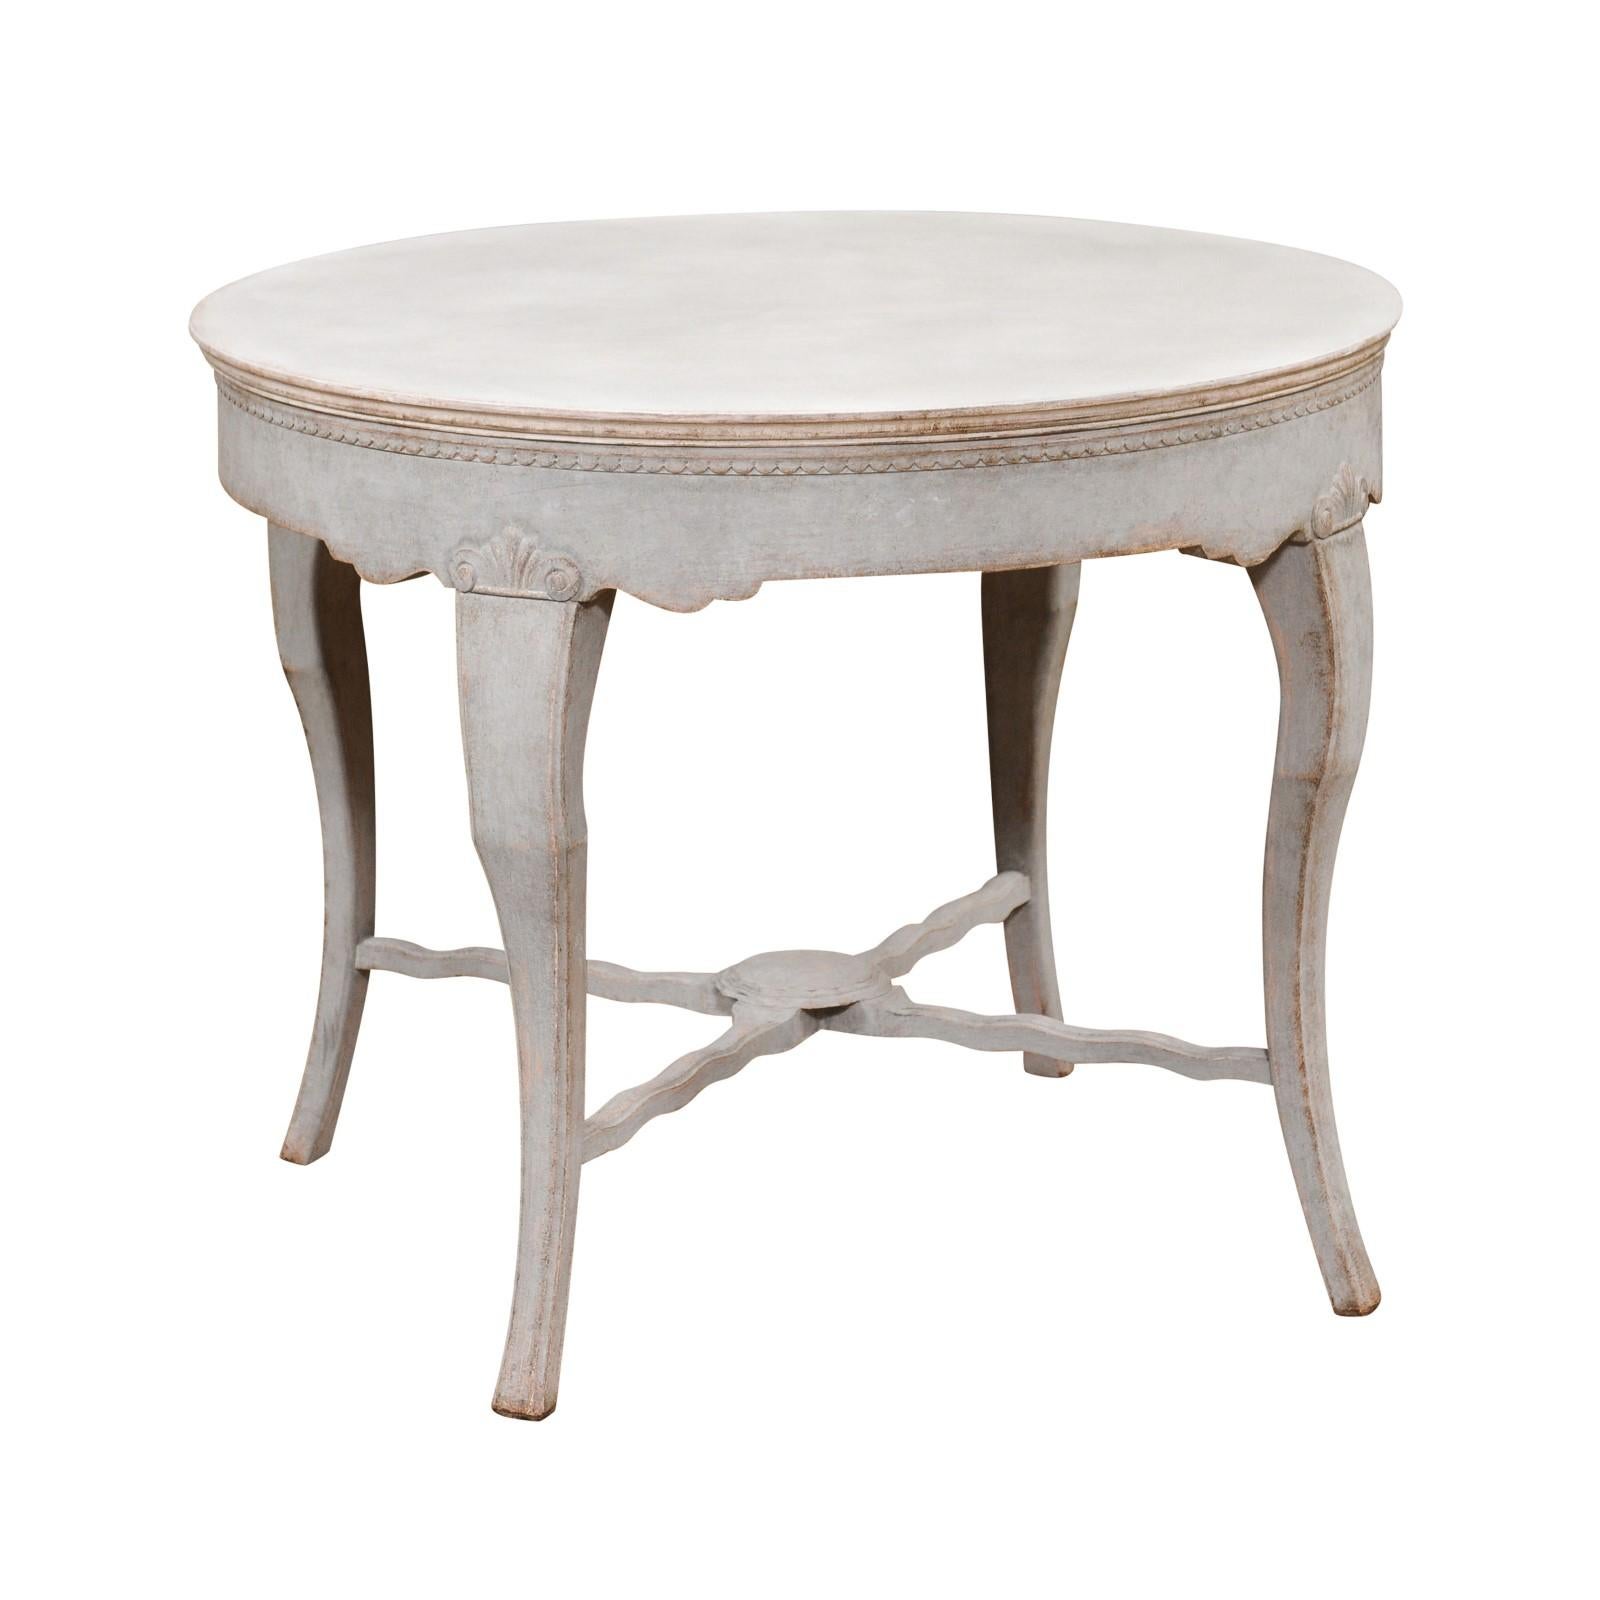 A Swedish gray painted table from the 19th century with circular top, carved beads, cabriole legs and X-Form stretcher. This 19th-century Swedish gray painted table exudes timeless charm and craftsmanship. Its circular top, adorned with delicately